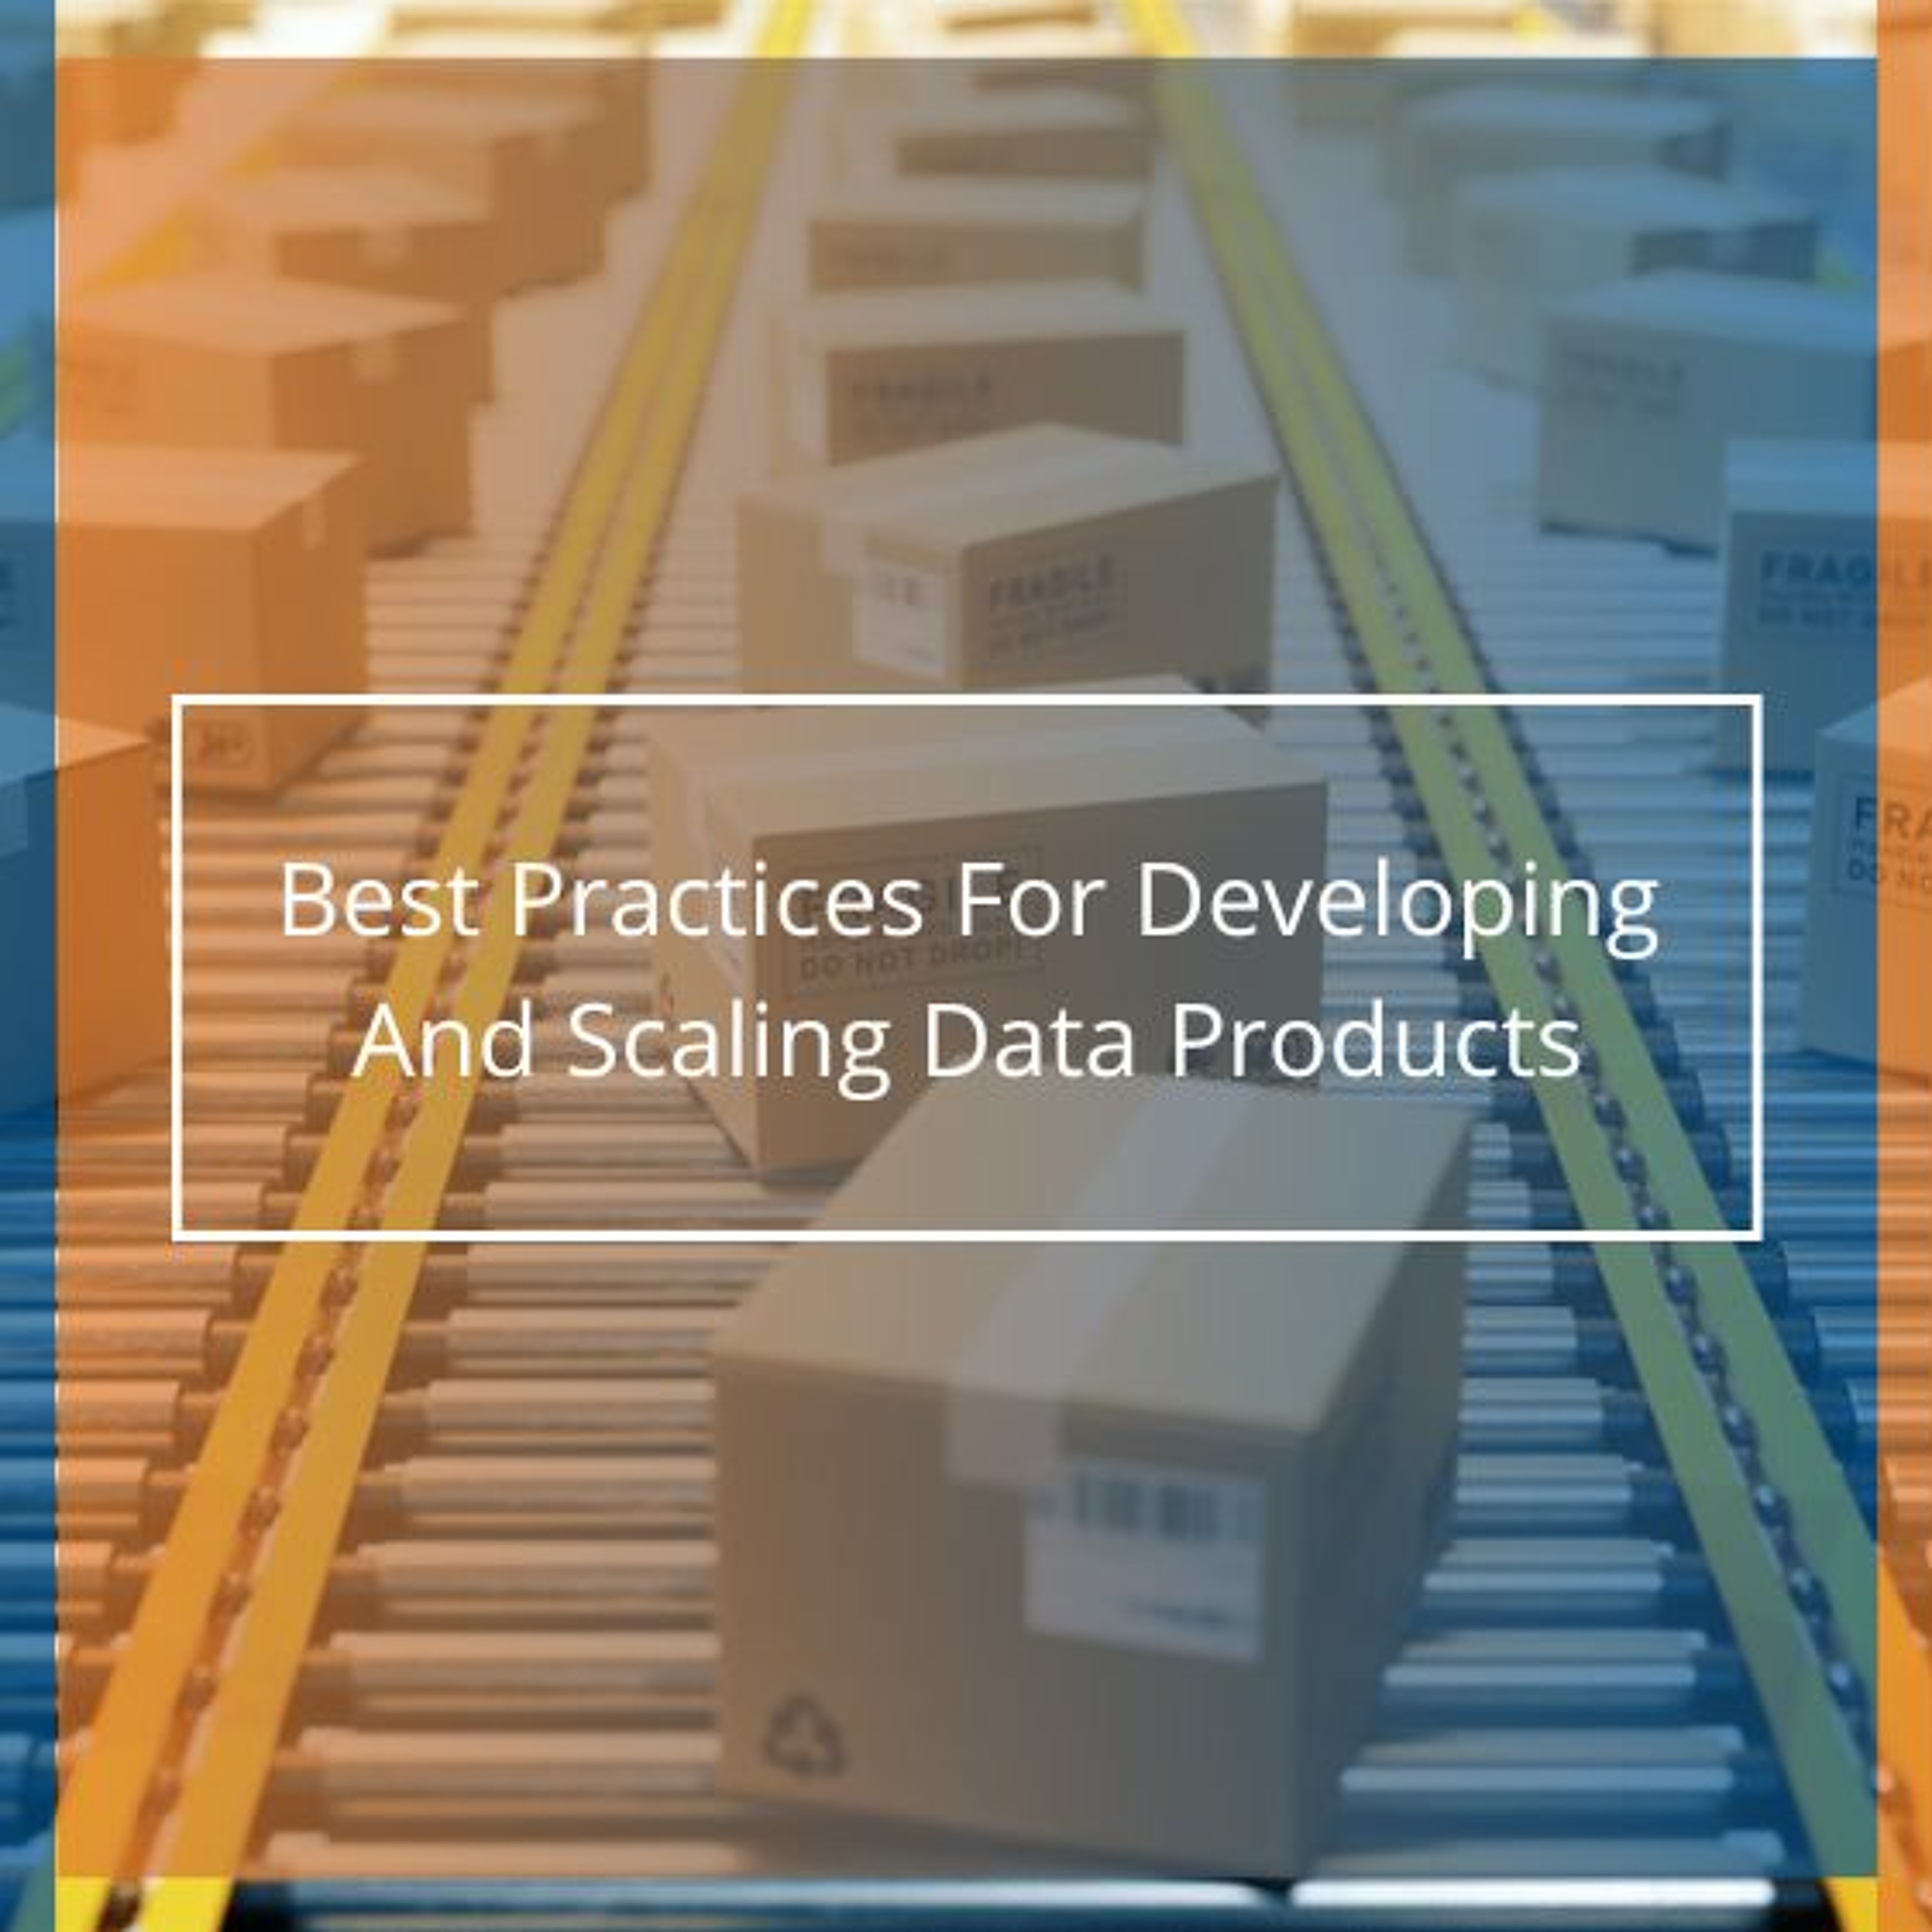 Best Practices For Developing And Scaling Data Products - Audio Blog